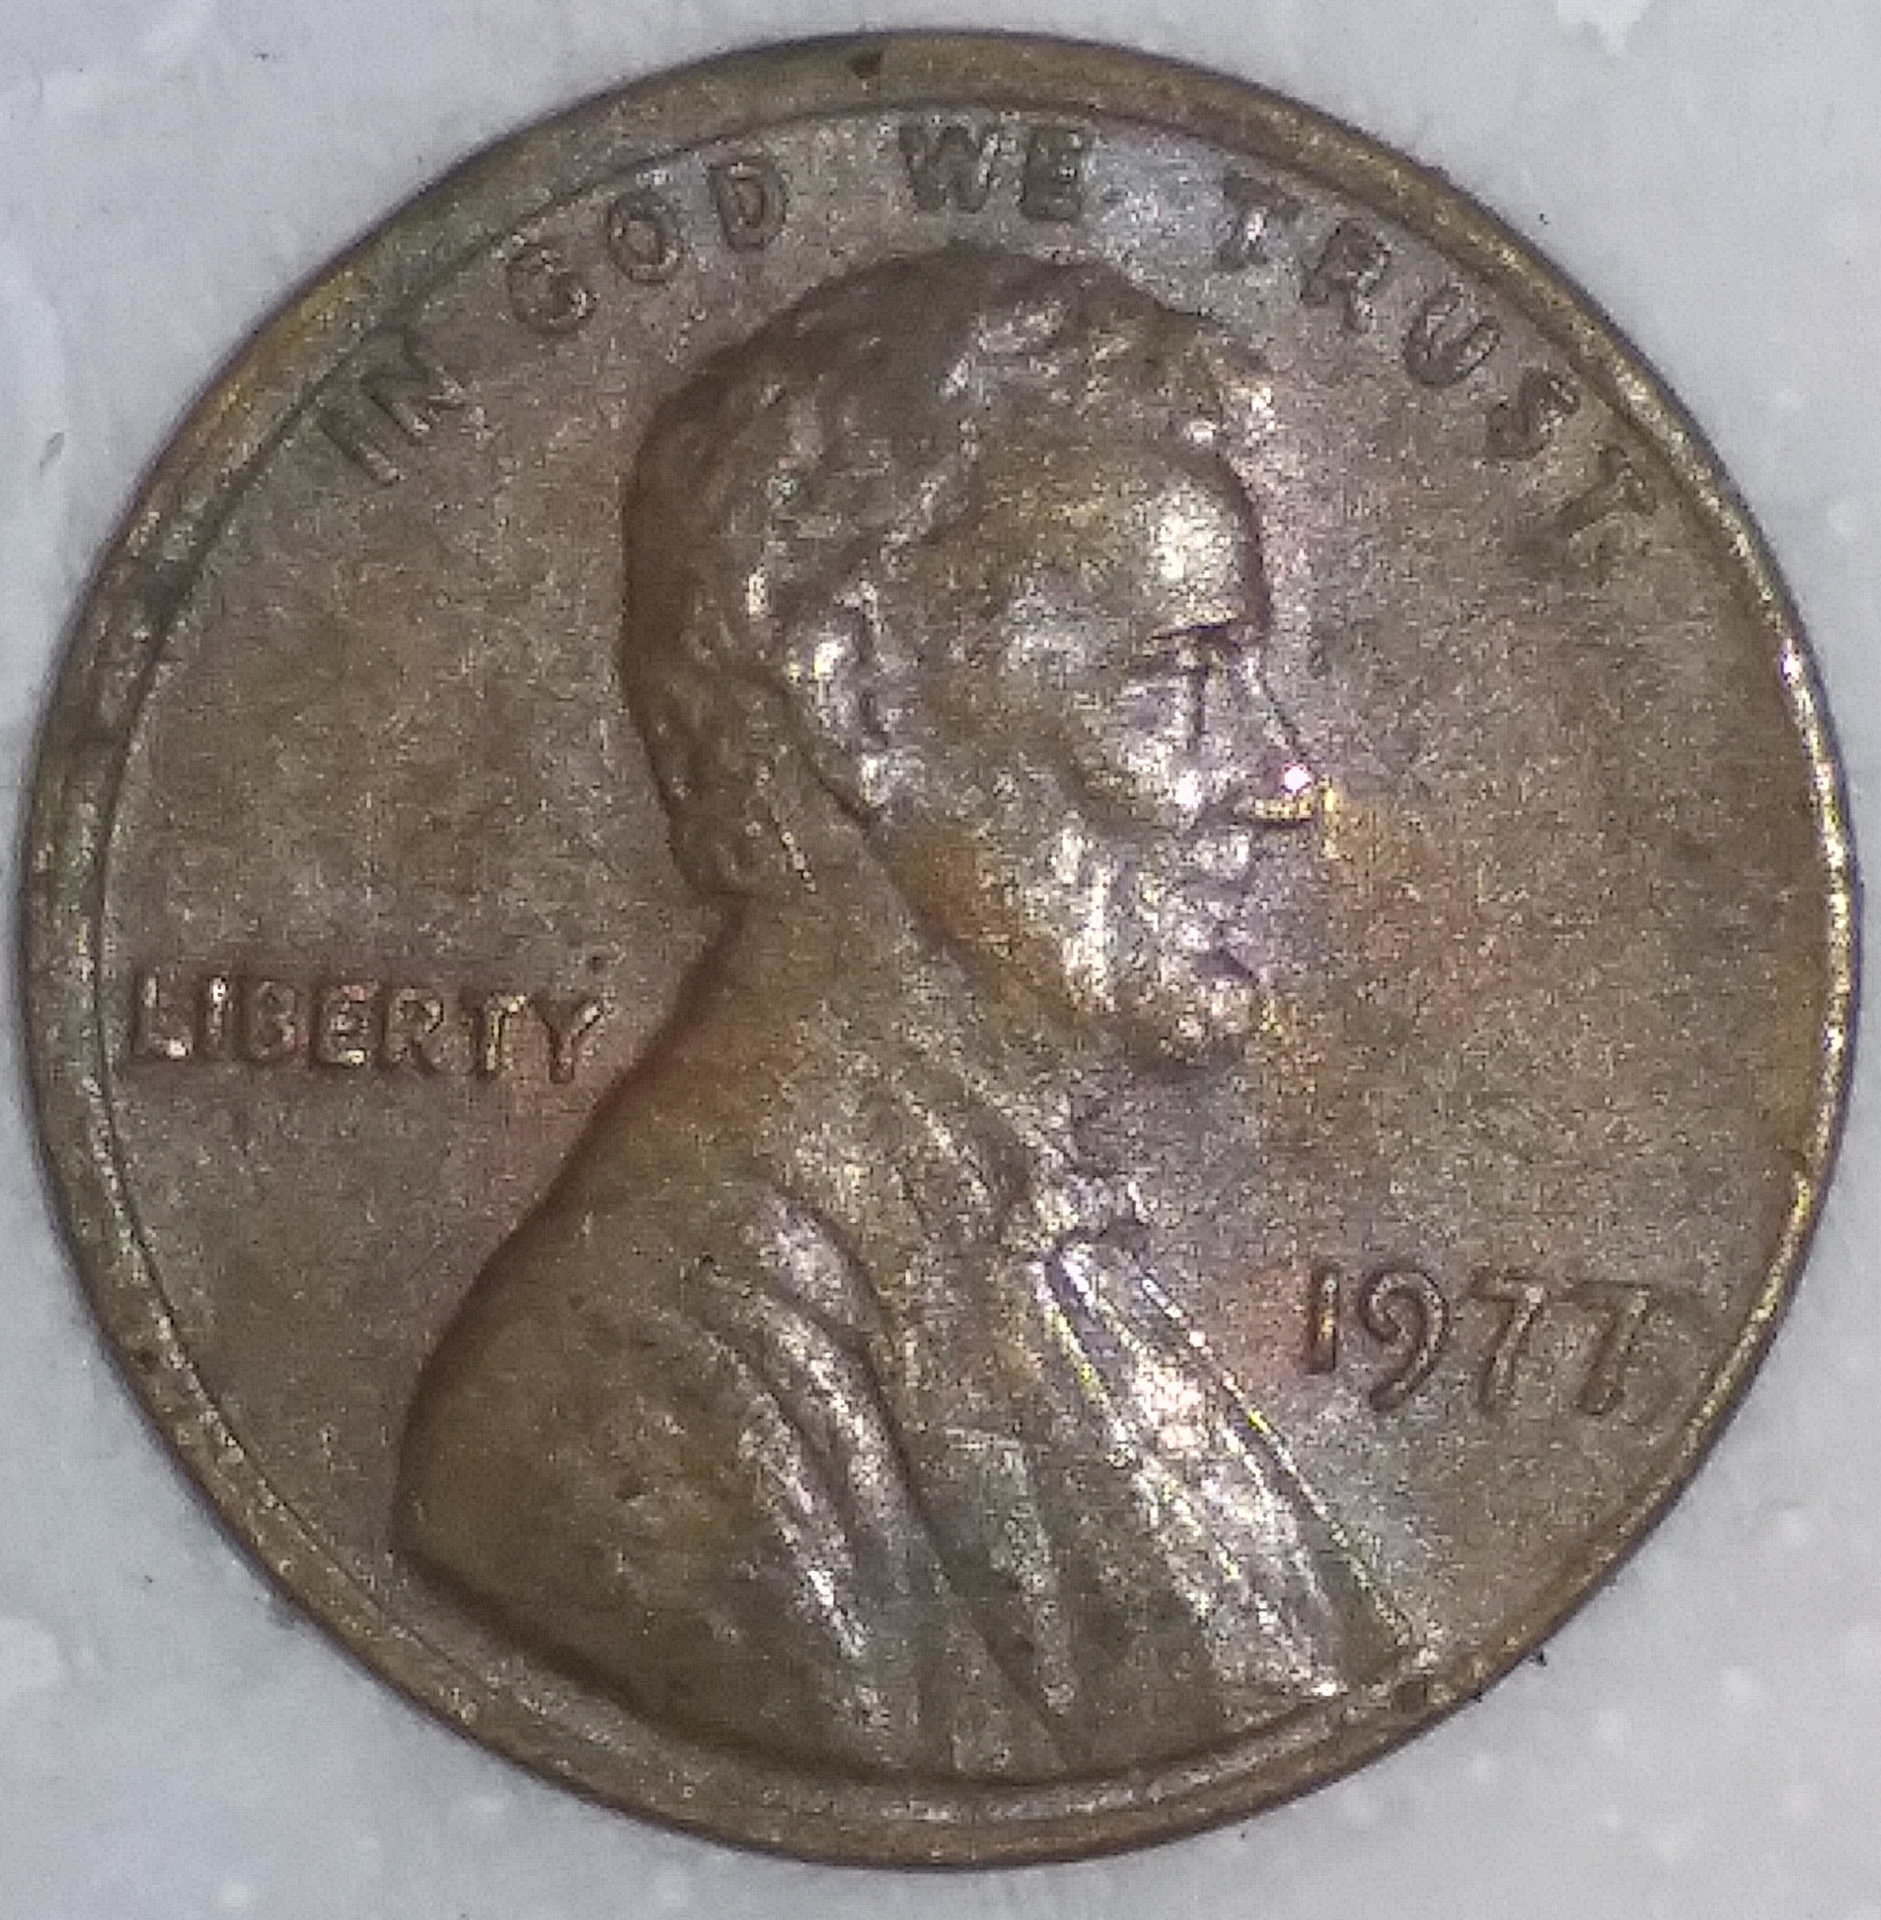 1977 Penny EDITED.png